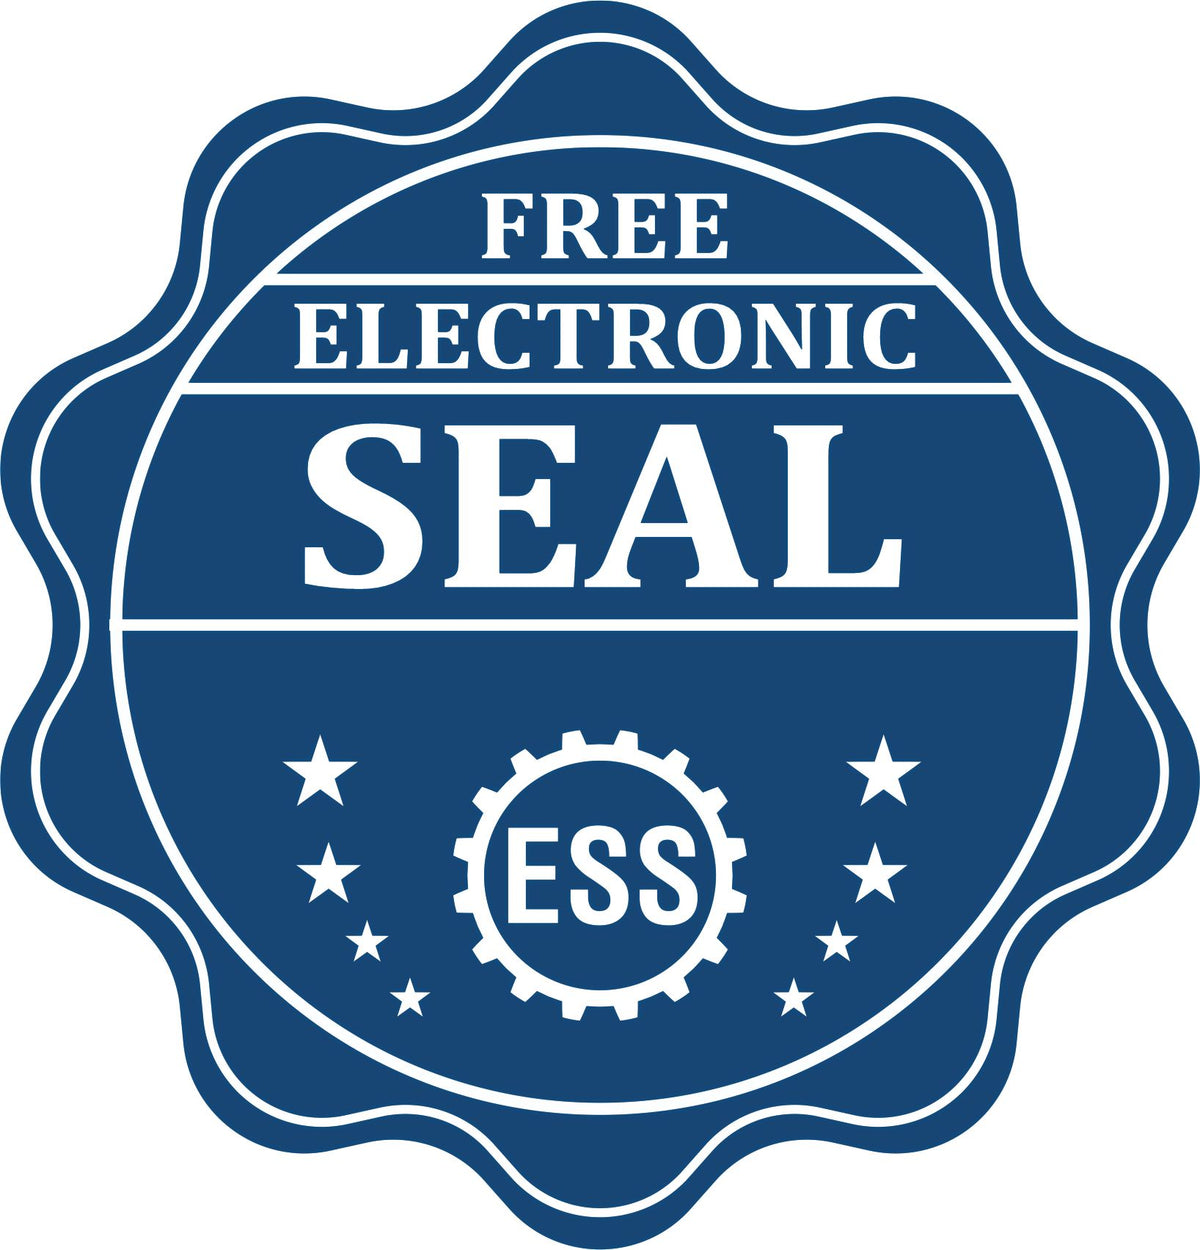 A badge showing a free electronic seal for the Gift Texas Geologist Seal with stars and the ESS gear on the emblem.